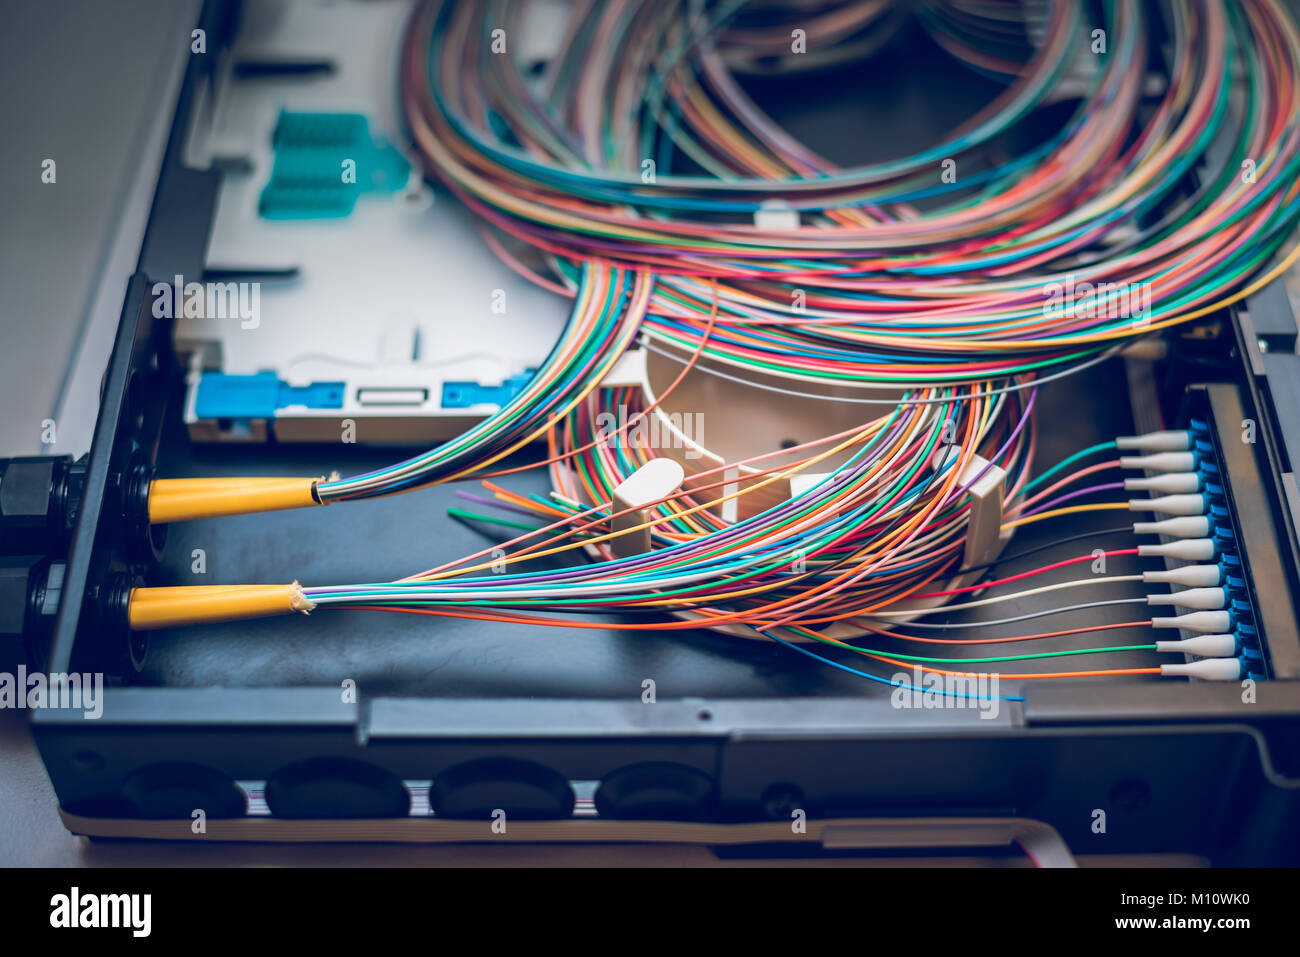 Fibre optic cables on top of patch distribution panel shelf for enterprise networking Stock Photo